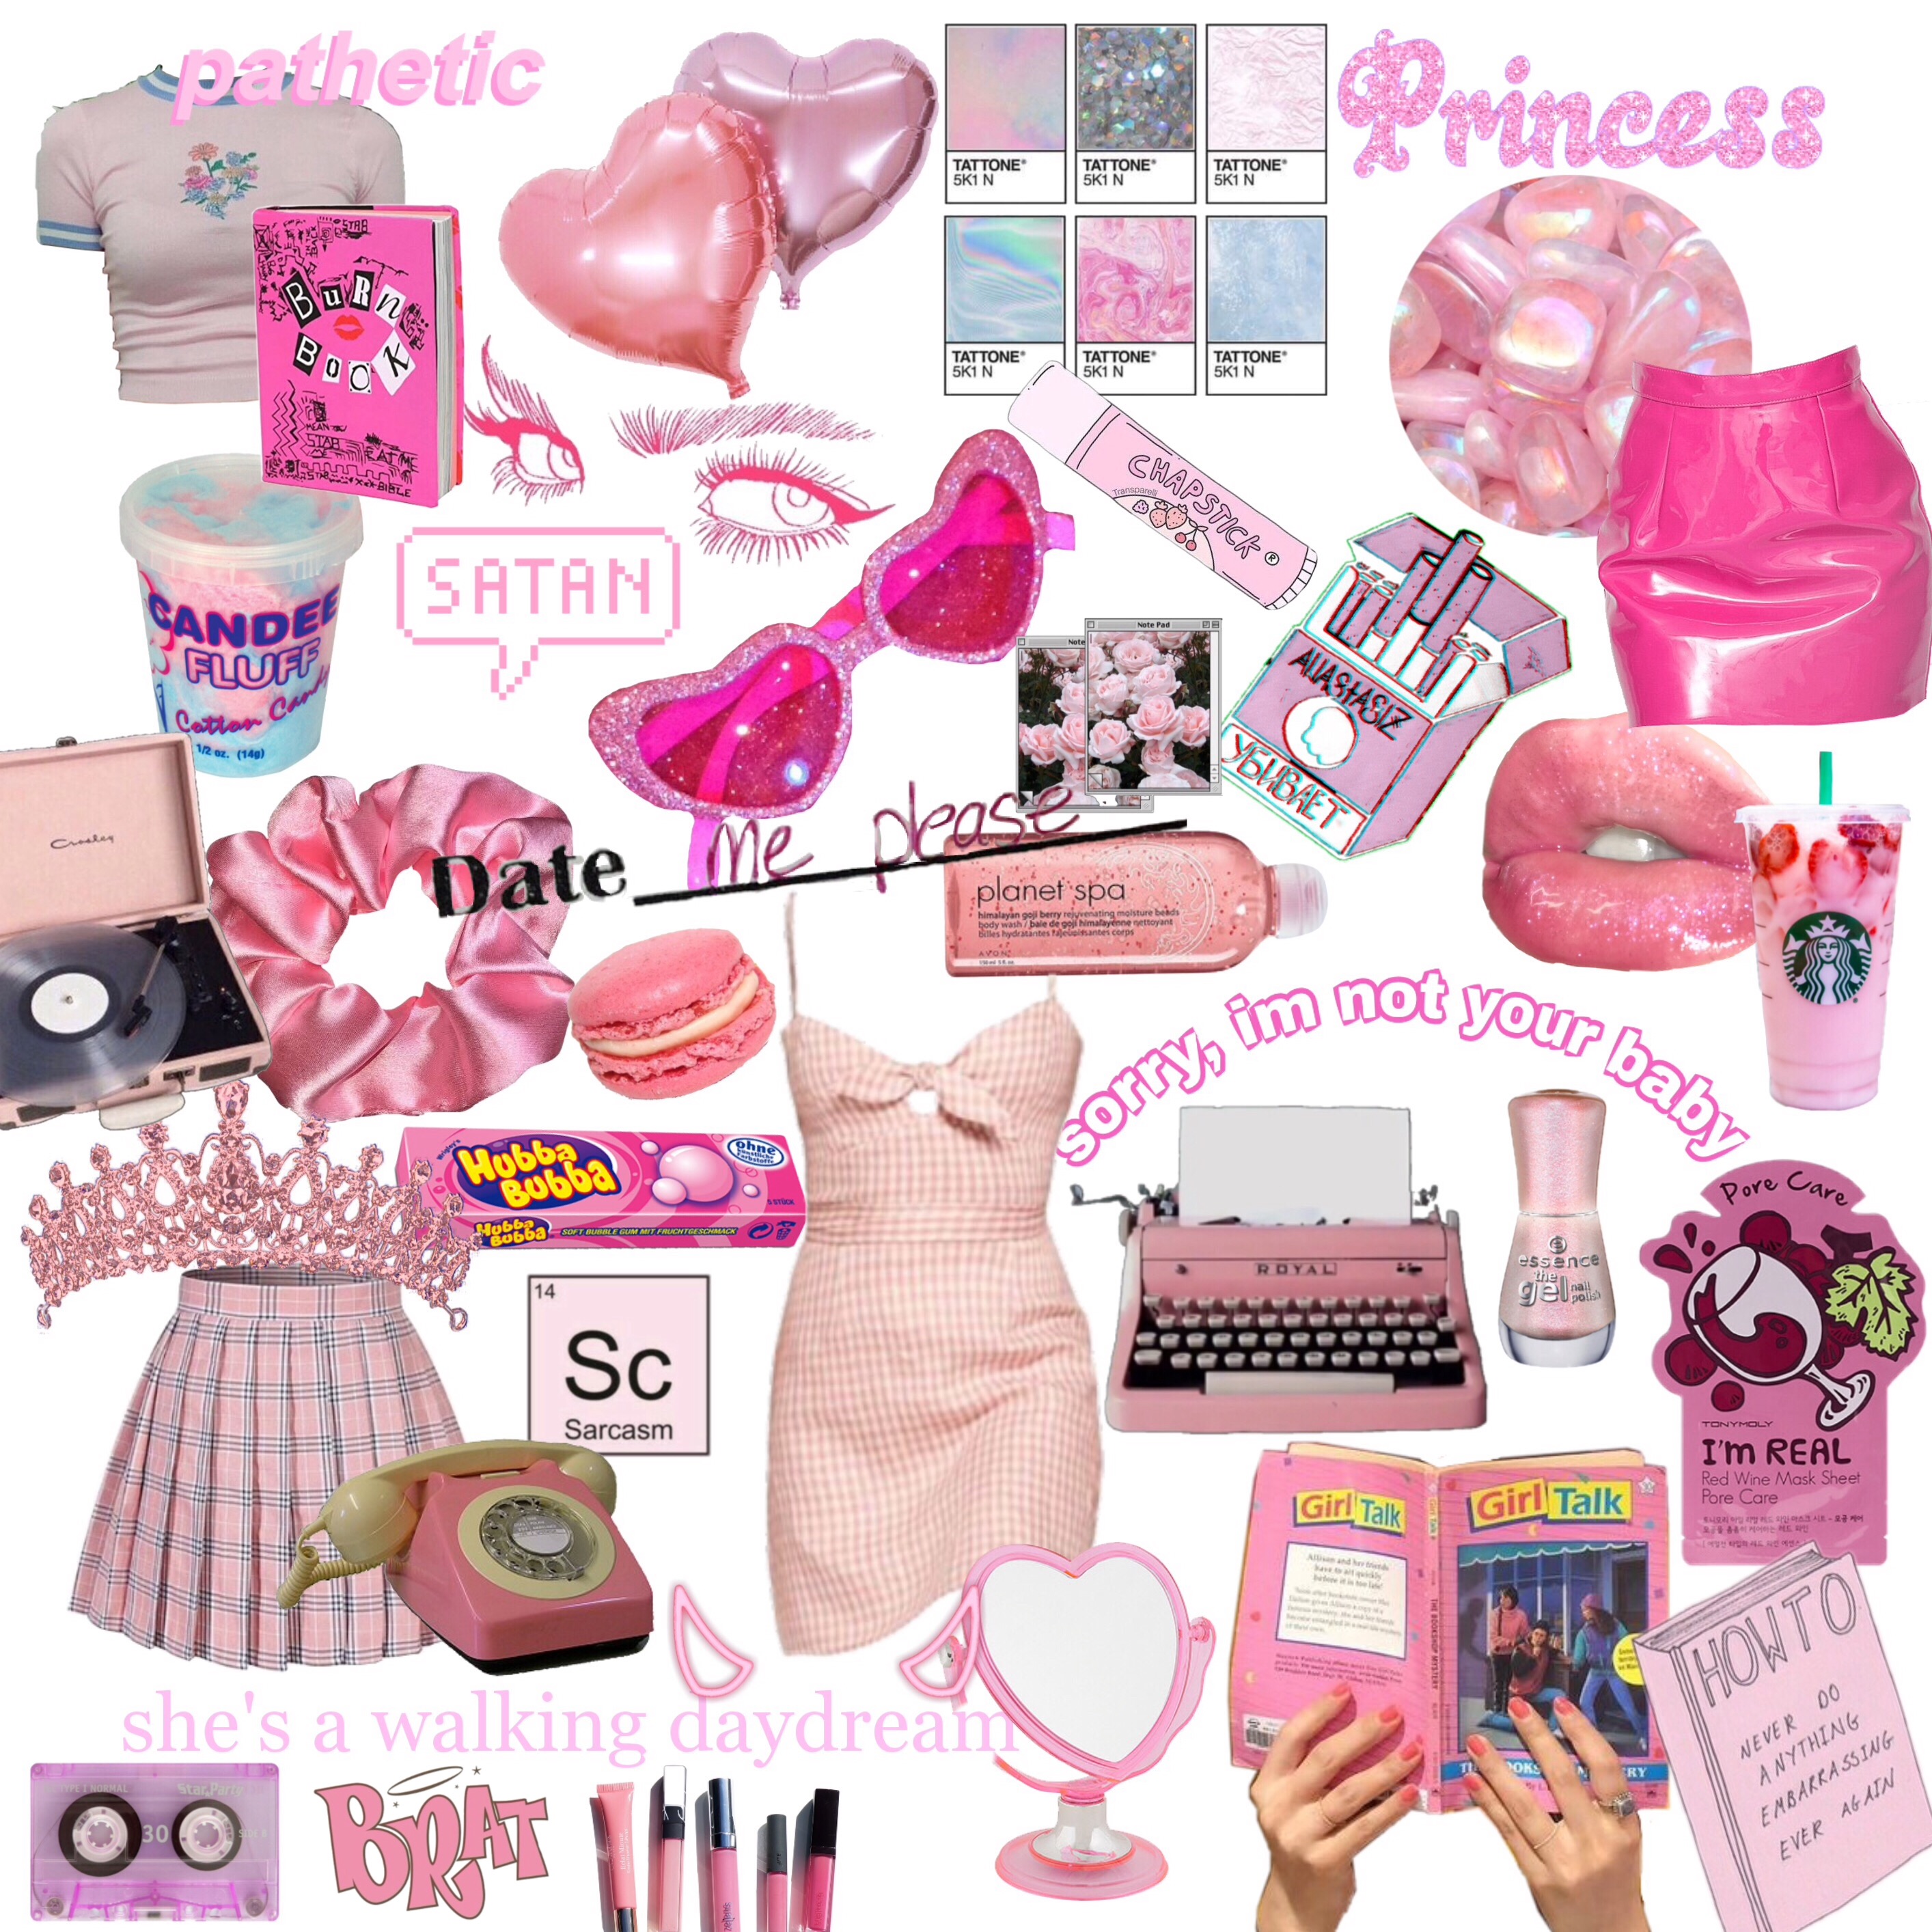 moodboard pink sticker angel princess image by @justagurly